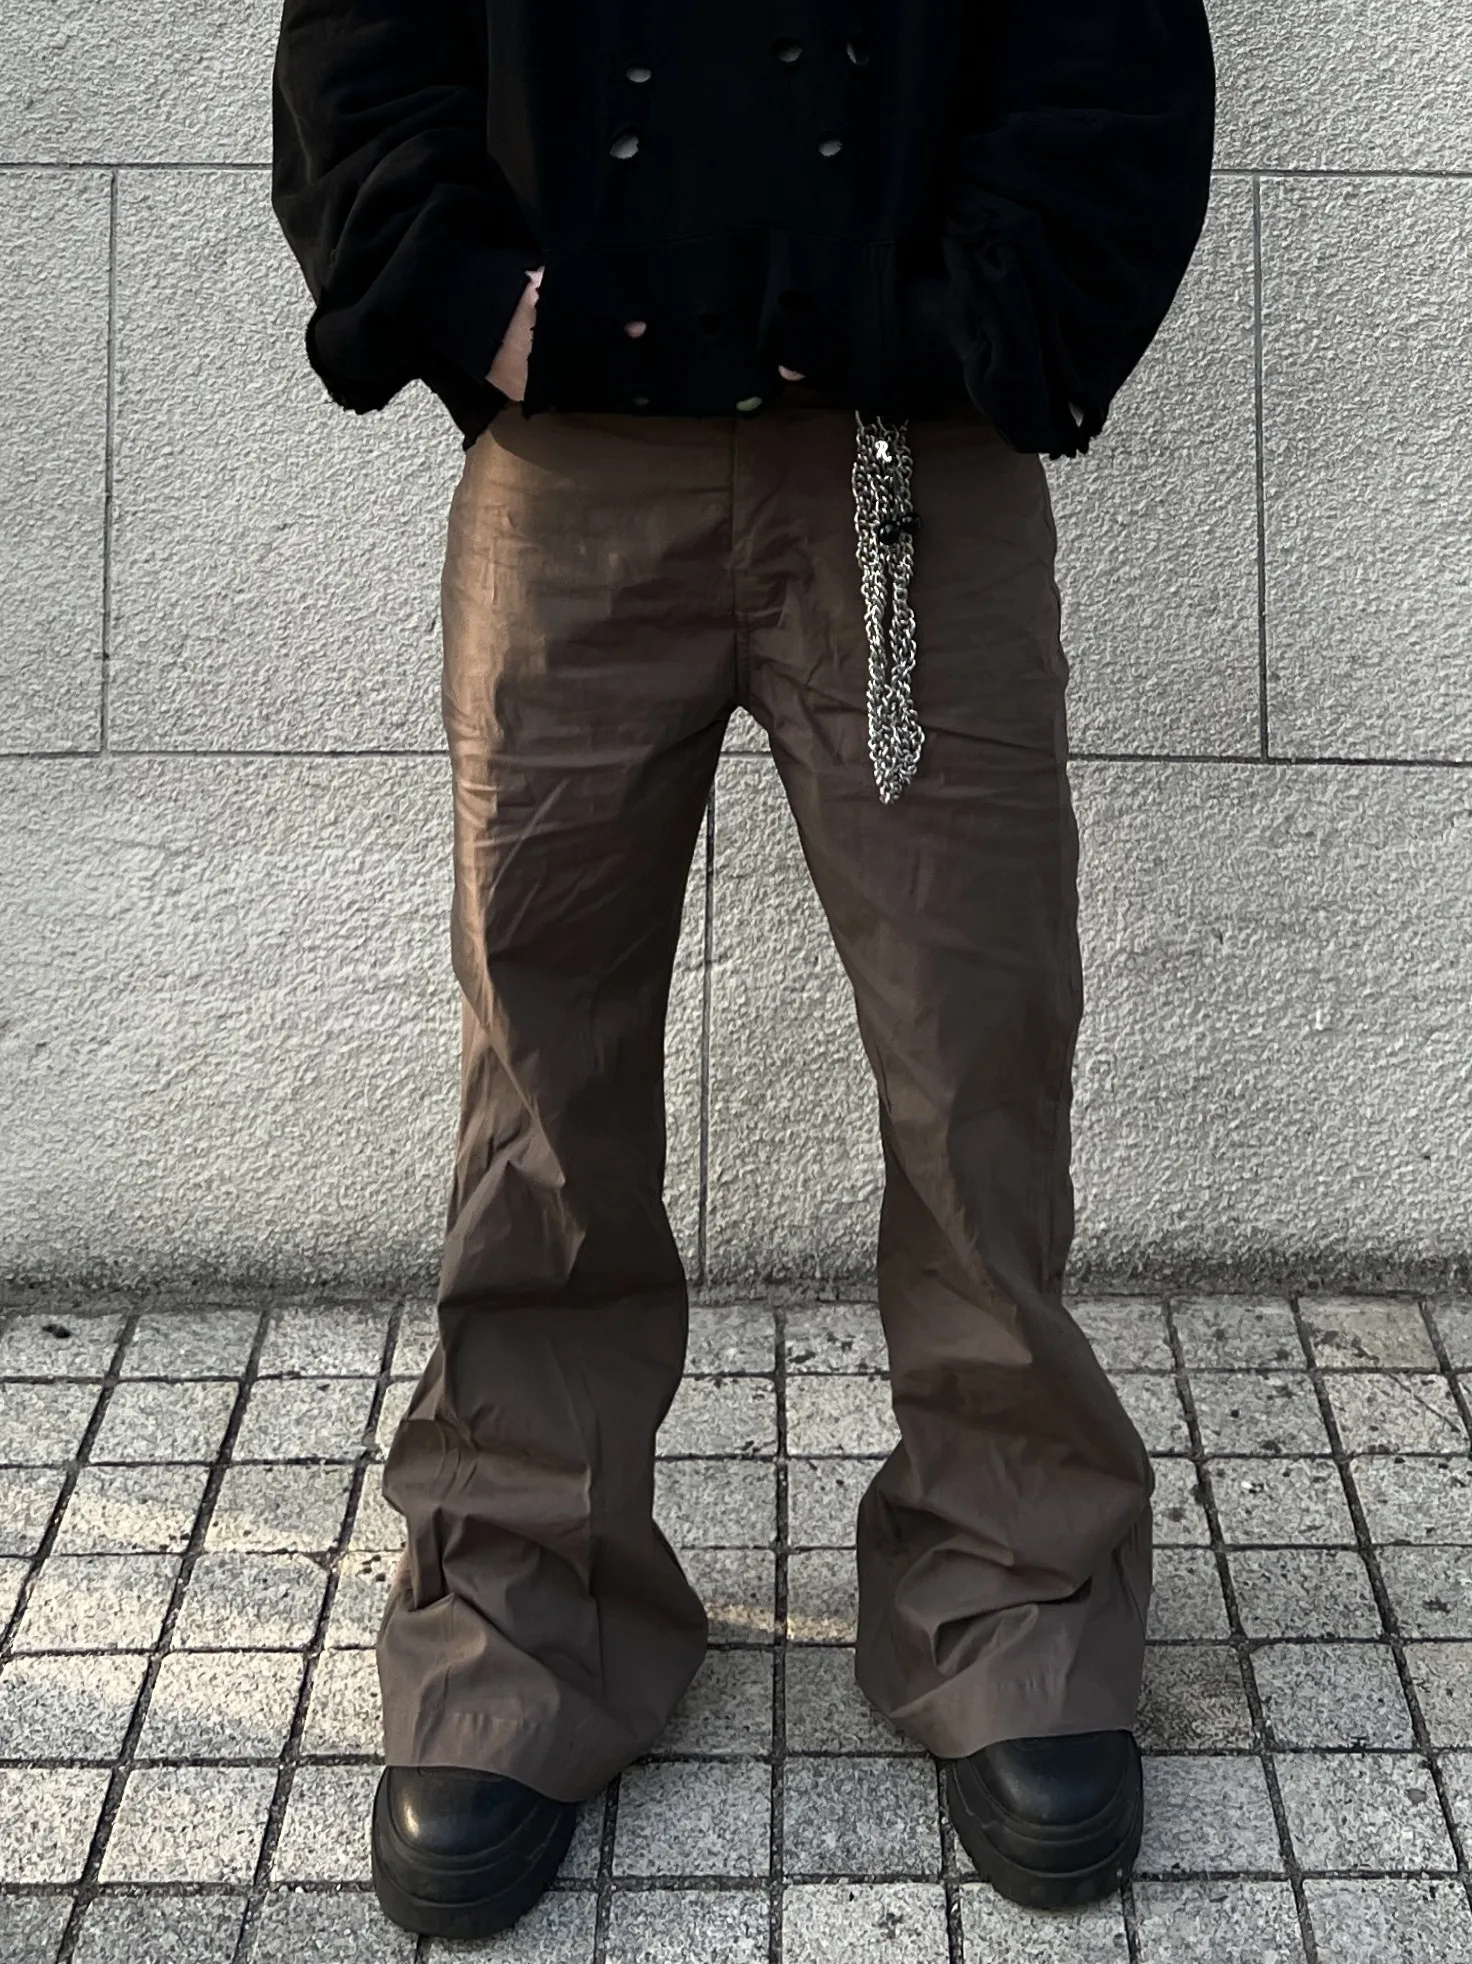 Rick Flared Pants Pleated Loose Brown Trousers Owens Pants Straight Casual Drawstring Loose Casual Pants